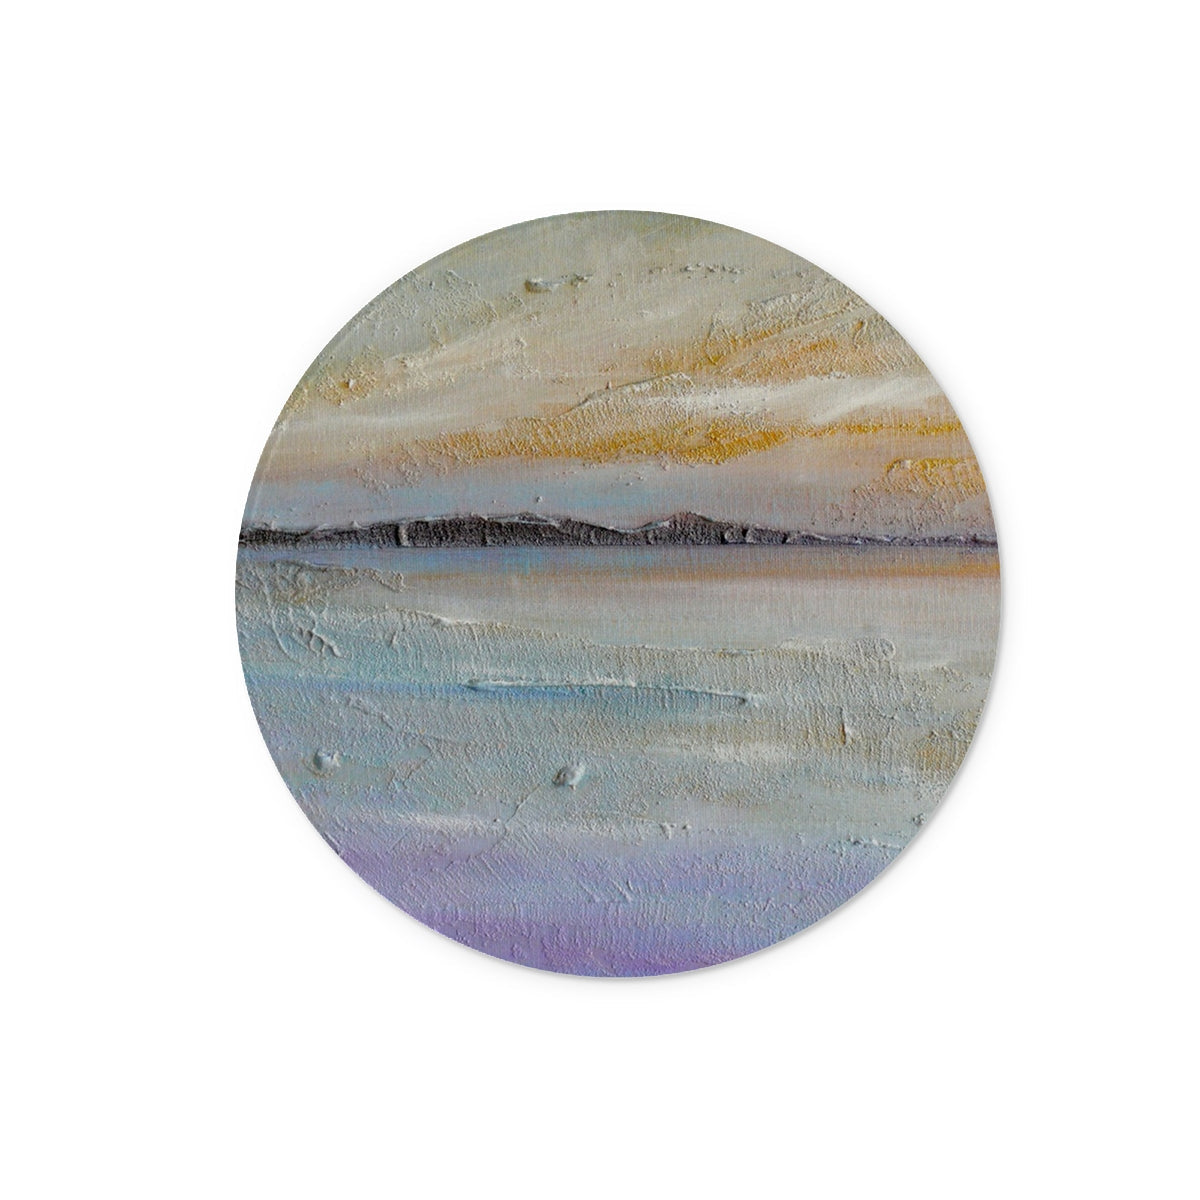 Sollas Beach South Uist Art Gifts Glass Chopping Board-Glass Chopping Boards-Hebridean Islands Art Gallery-12" Round-Paintings, Prints, Homeware, Art Gifts From Scotland By Scottish Artist Kevin Hunter